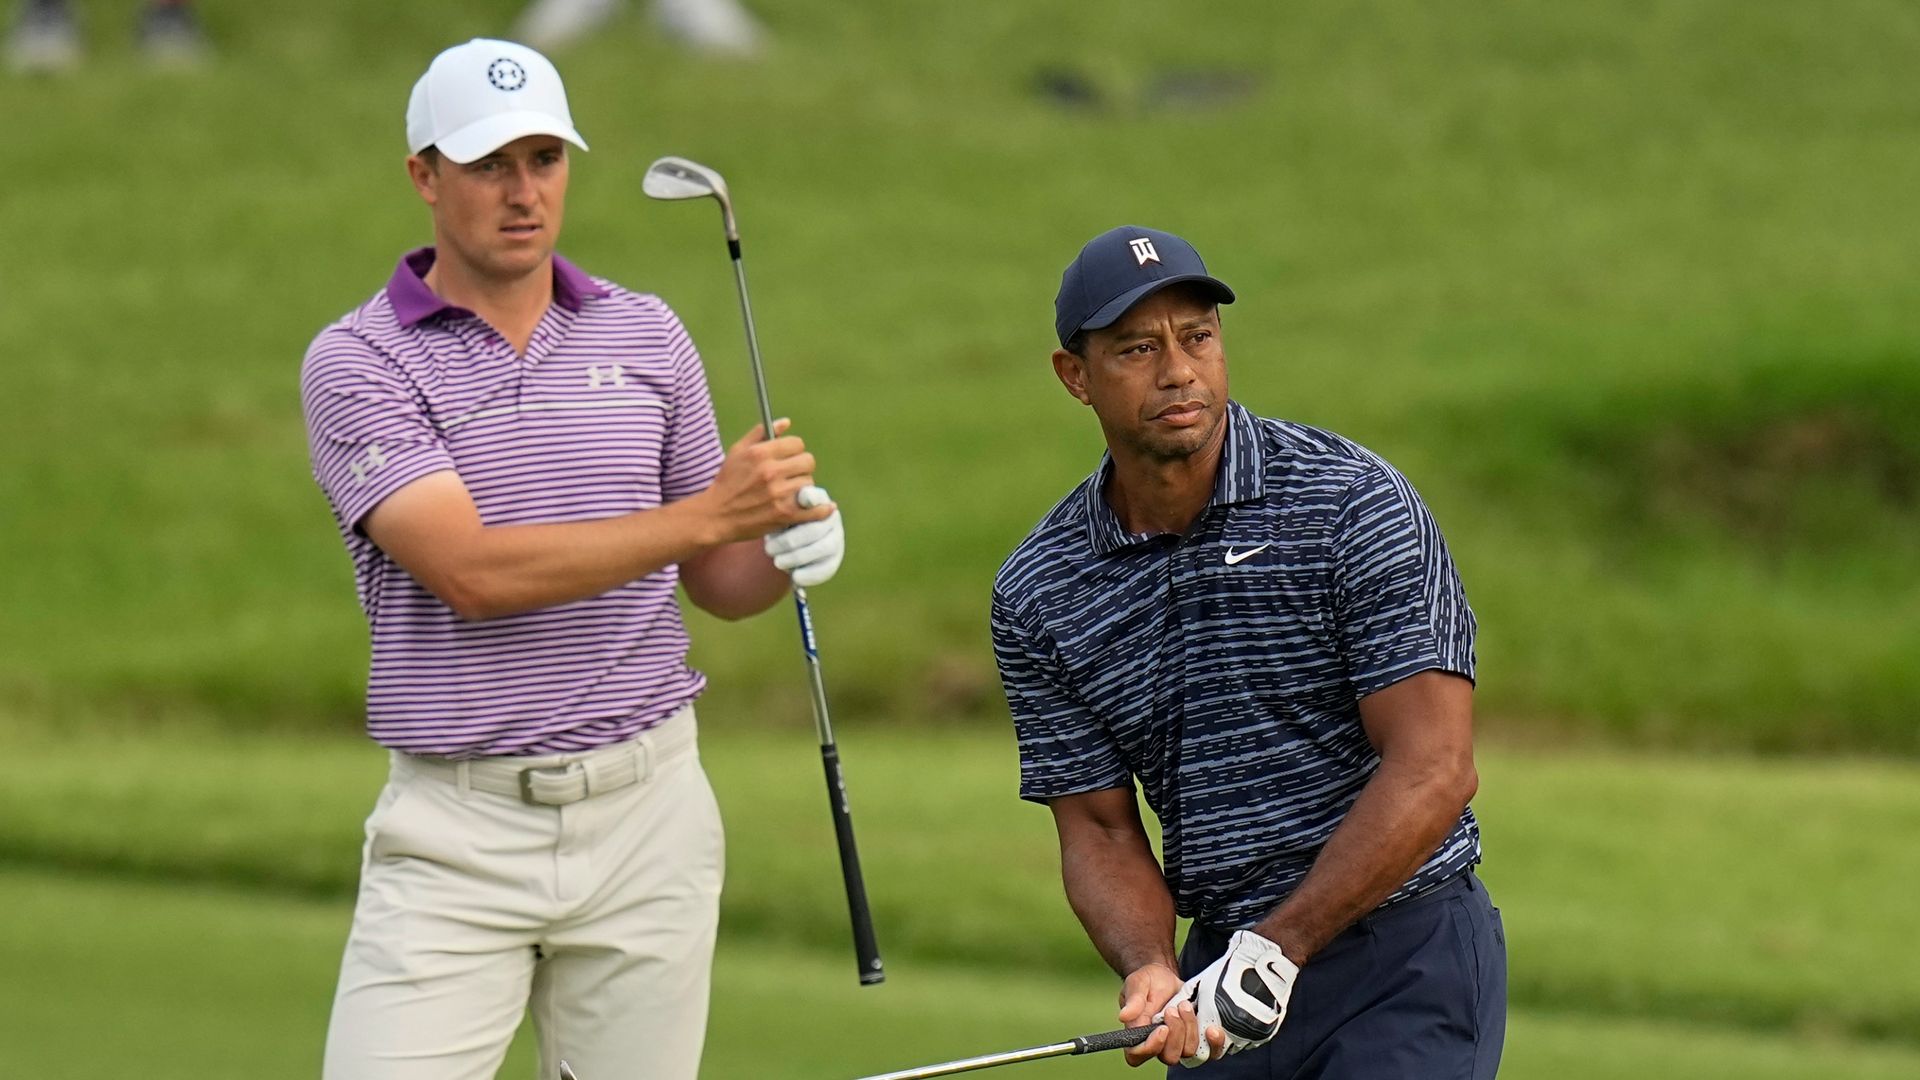 Woods out of PGA Championship; Spieth in field despite wrist injury